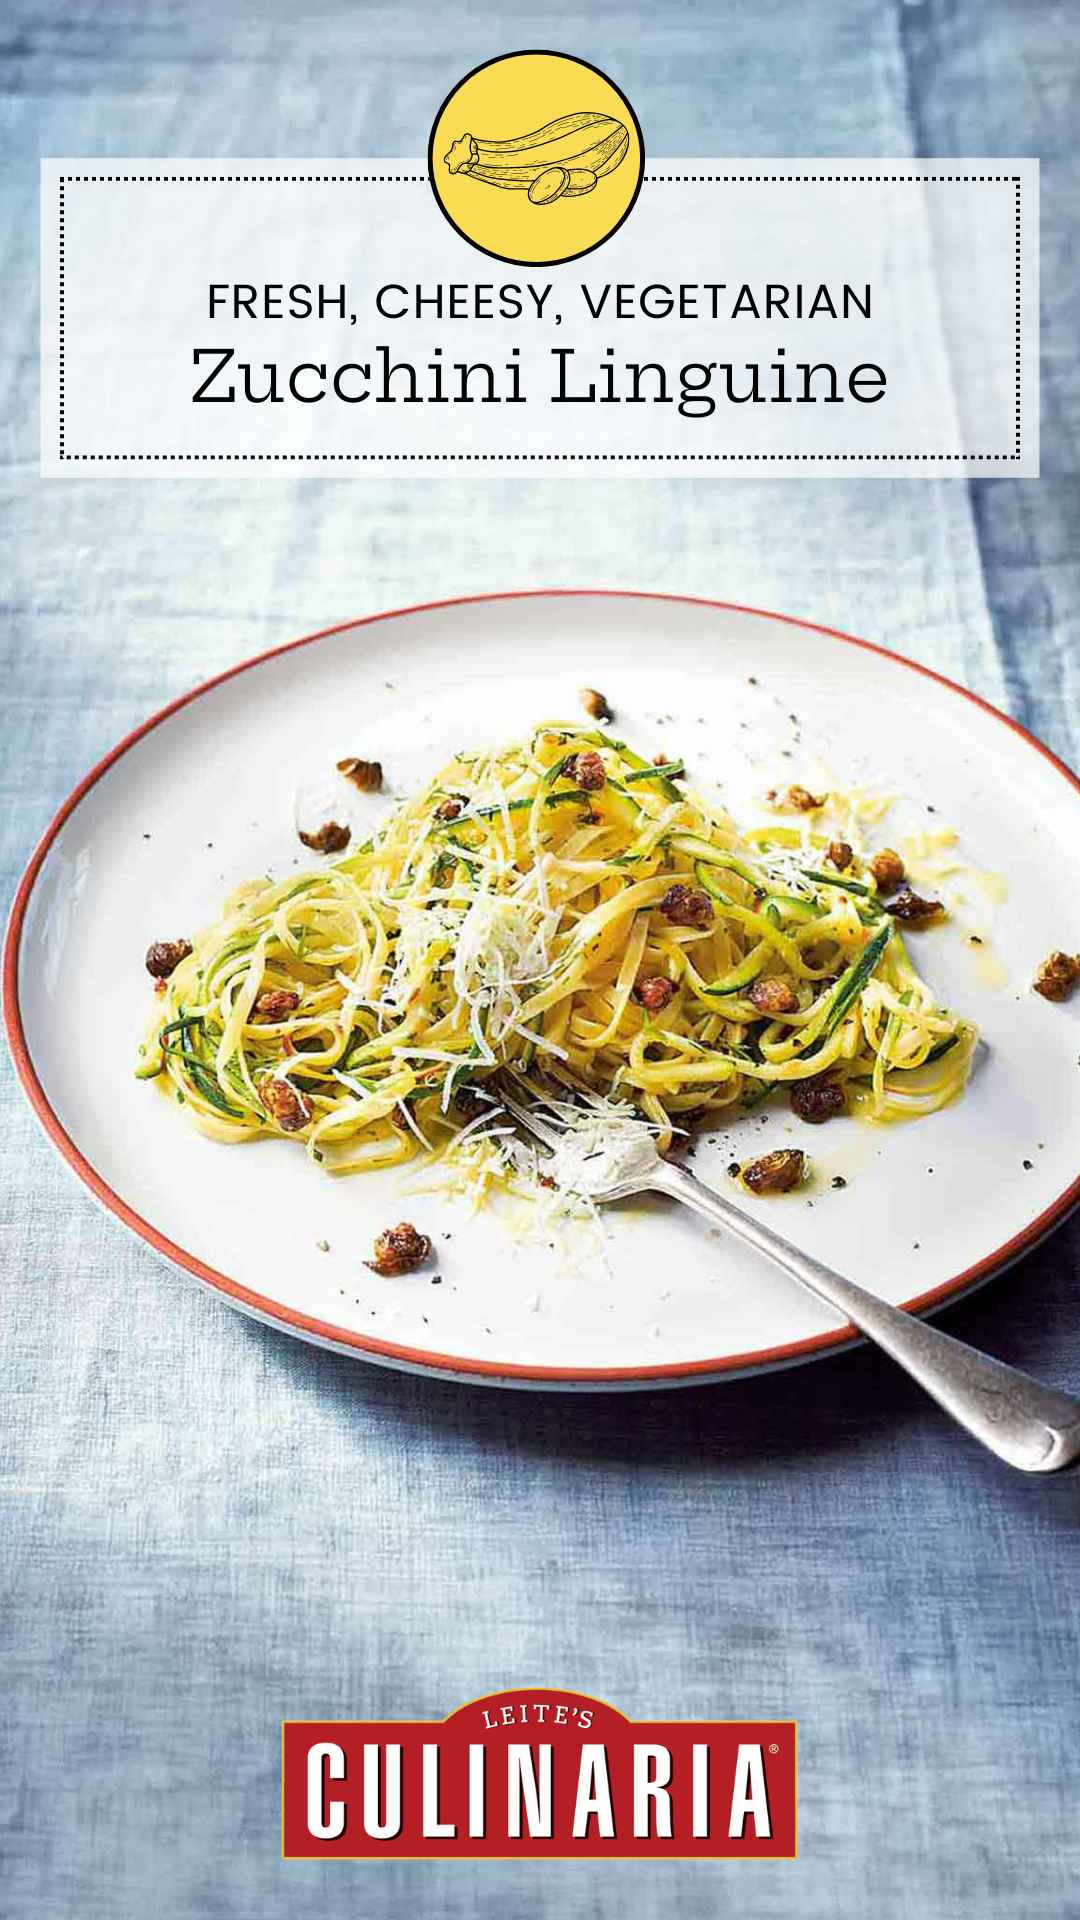 A serving of linguine and spiralized zucchini on a plate with capers and parmesan cheese.